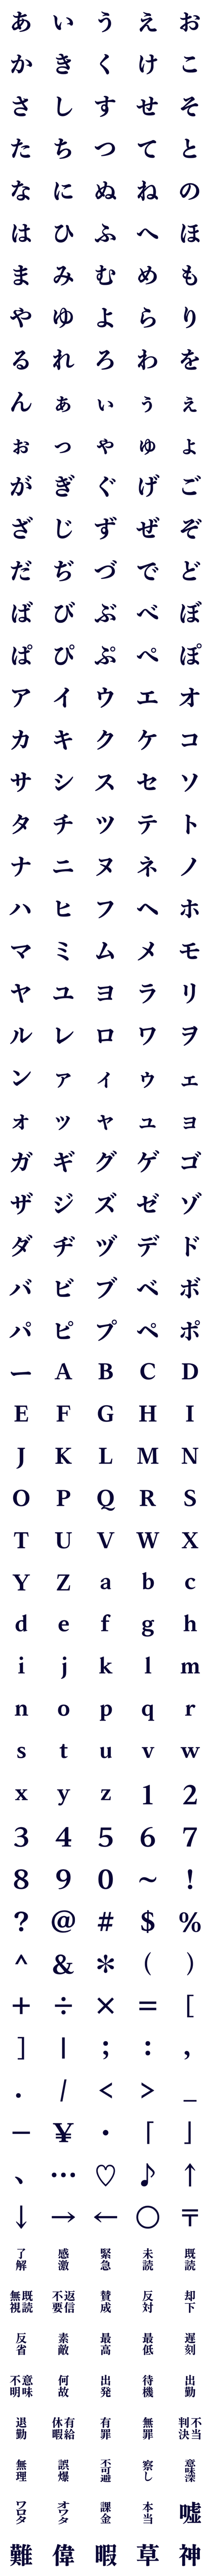 [LINE絵文字]DF金剛明朝体 フォント絵文字の画像一覧